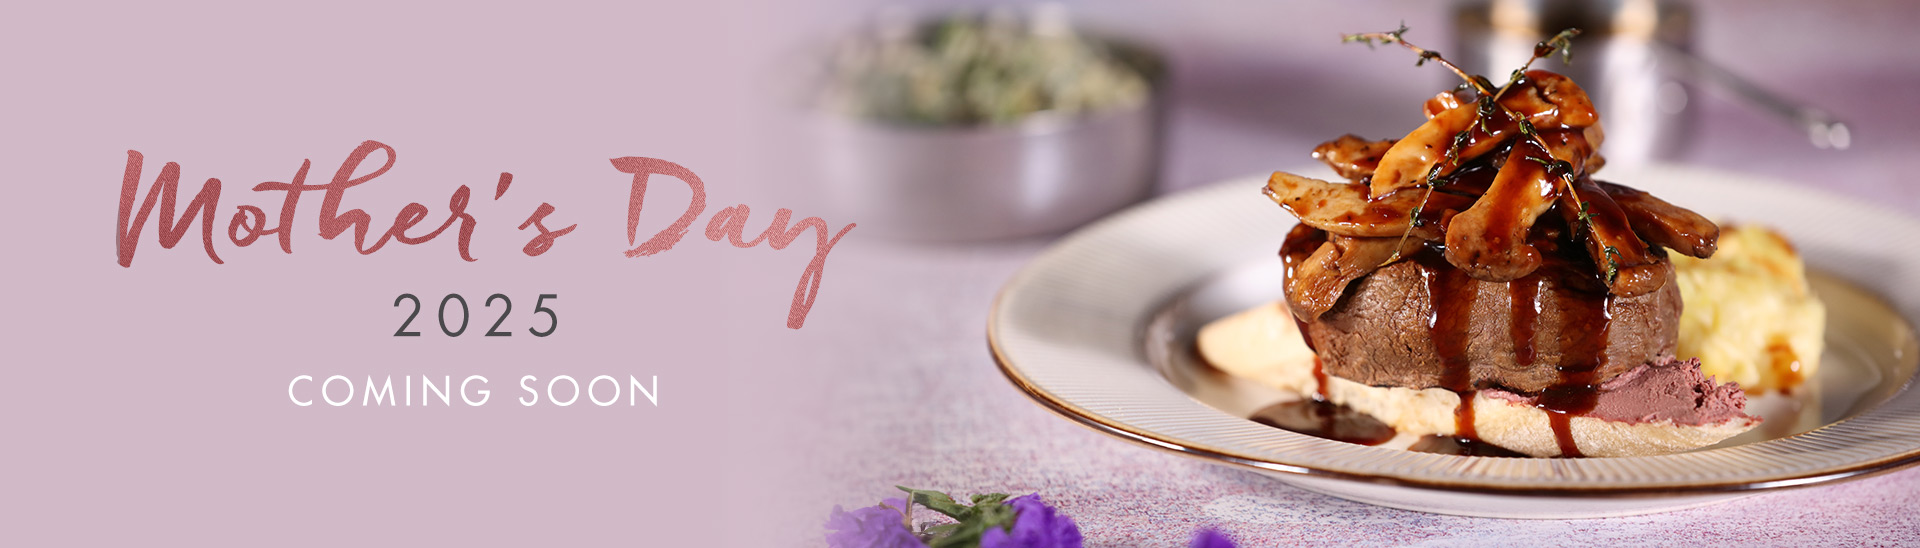 Mother’s Day menu 2024 at Miller & Carter Maidstone, Mother’s Day menu in Maidstone